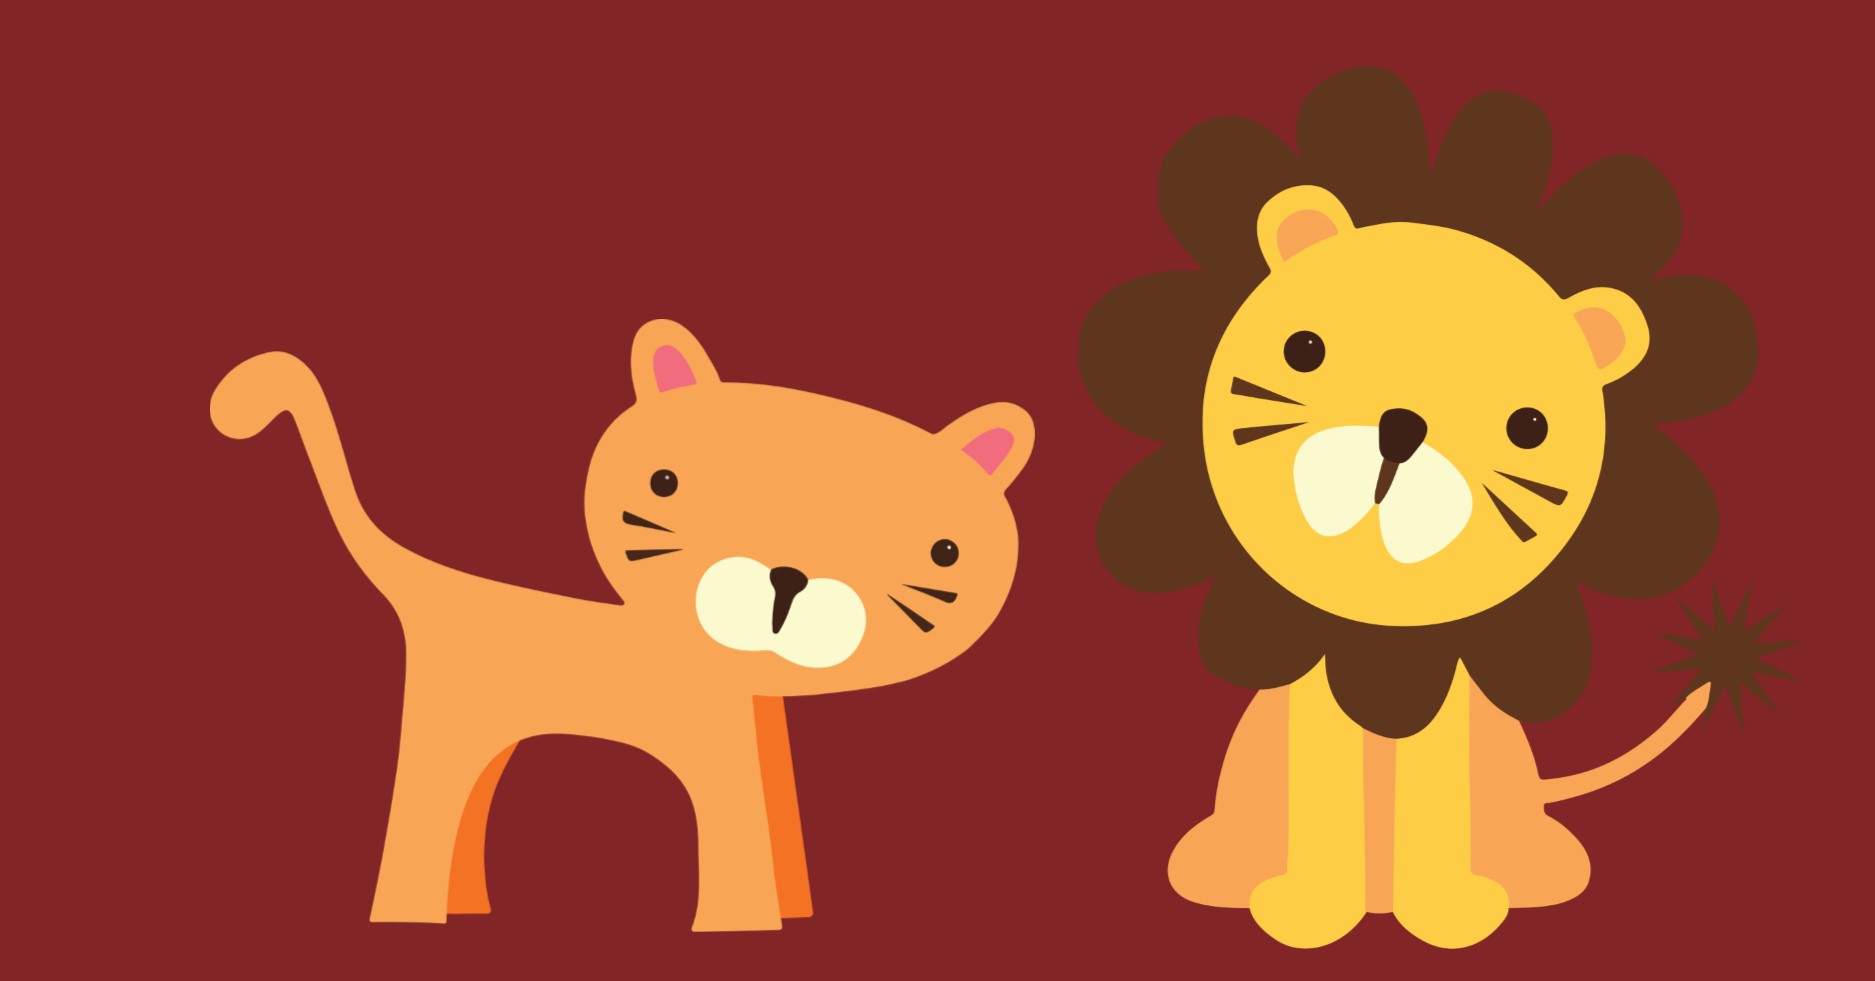 Toy tiger and lion on red background